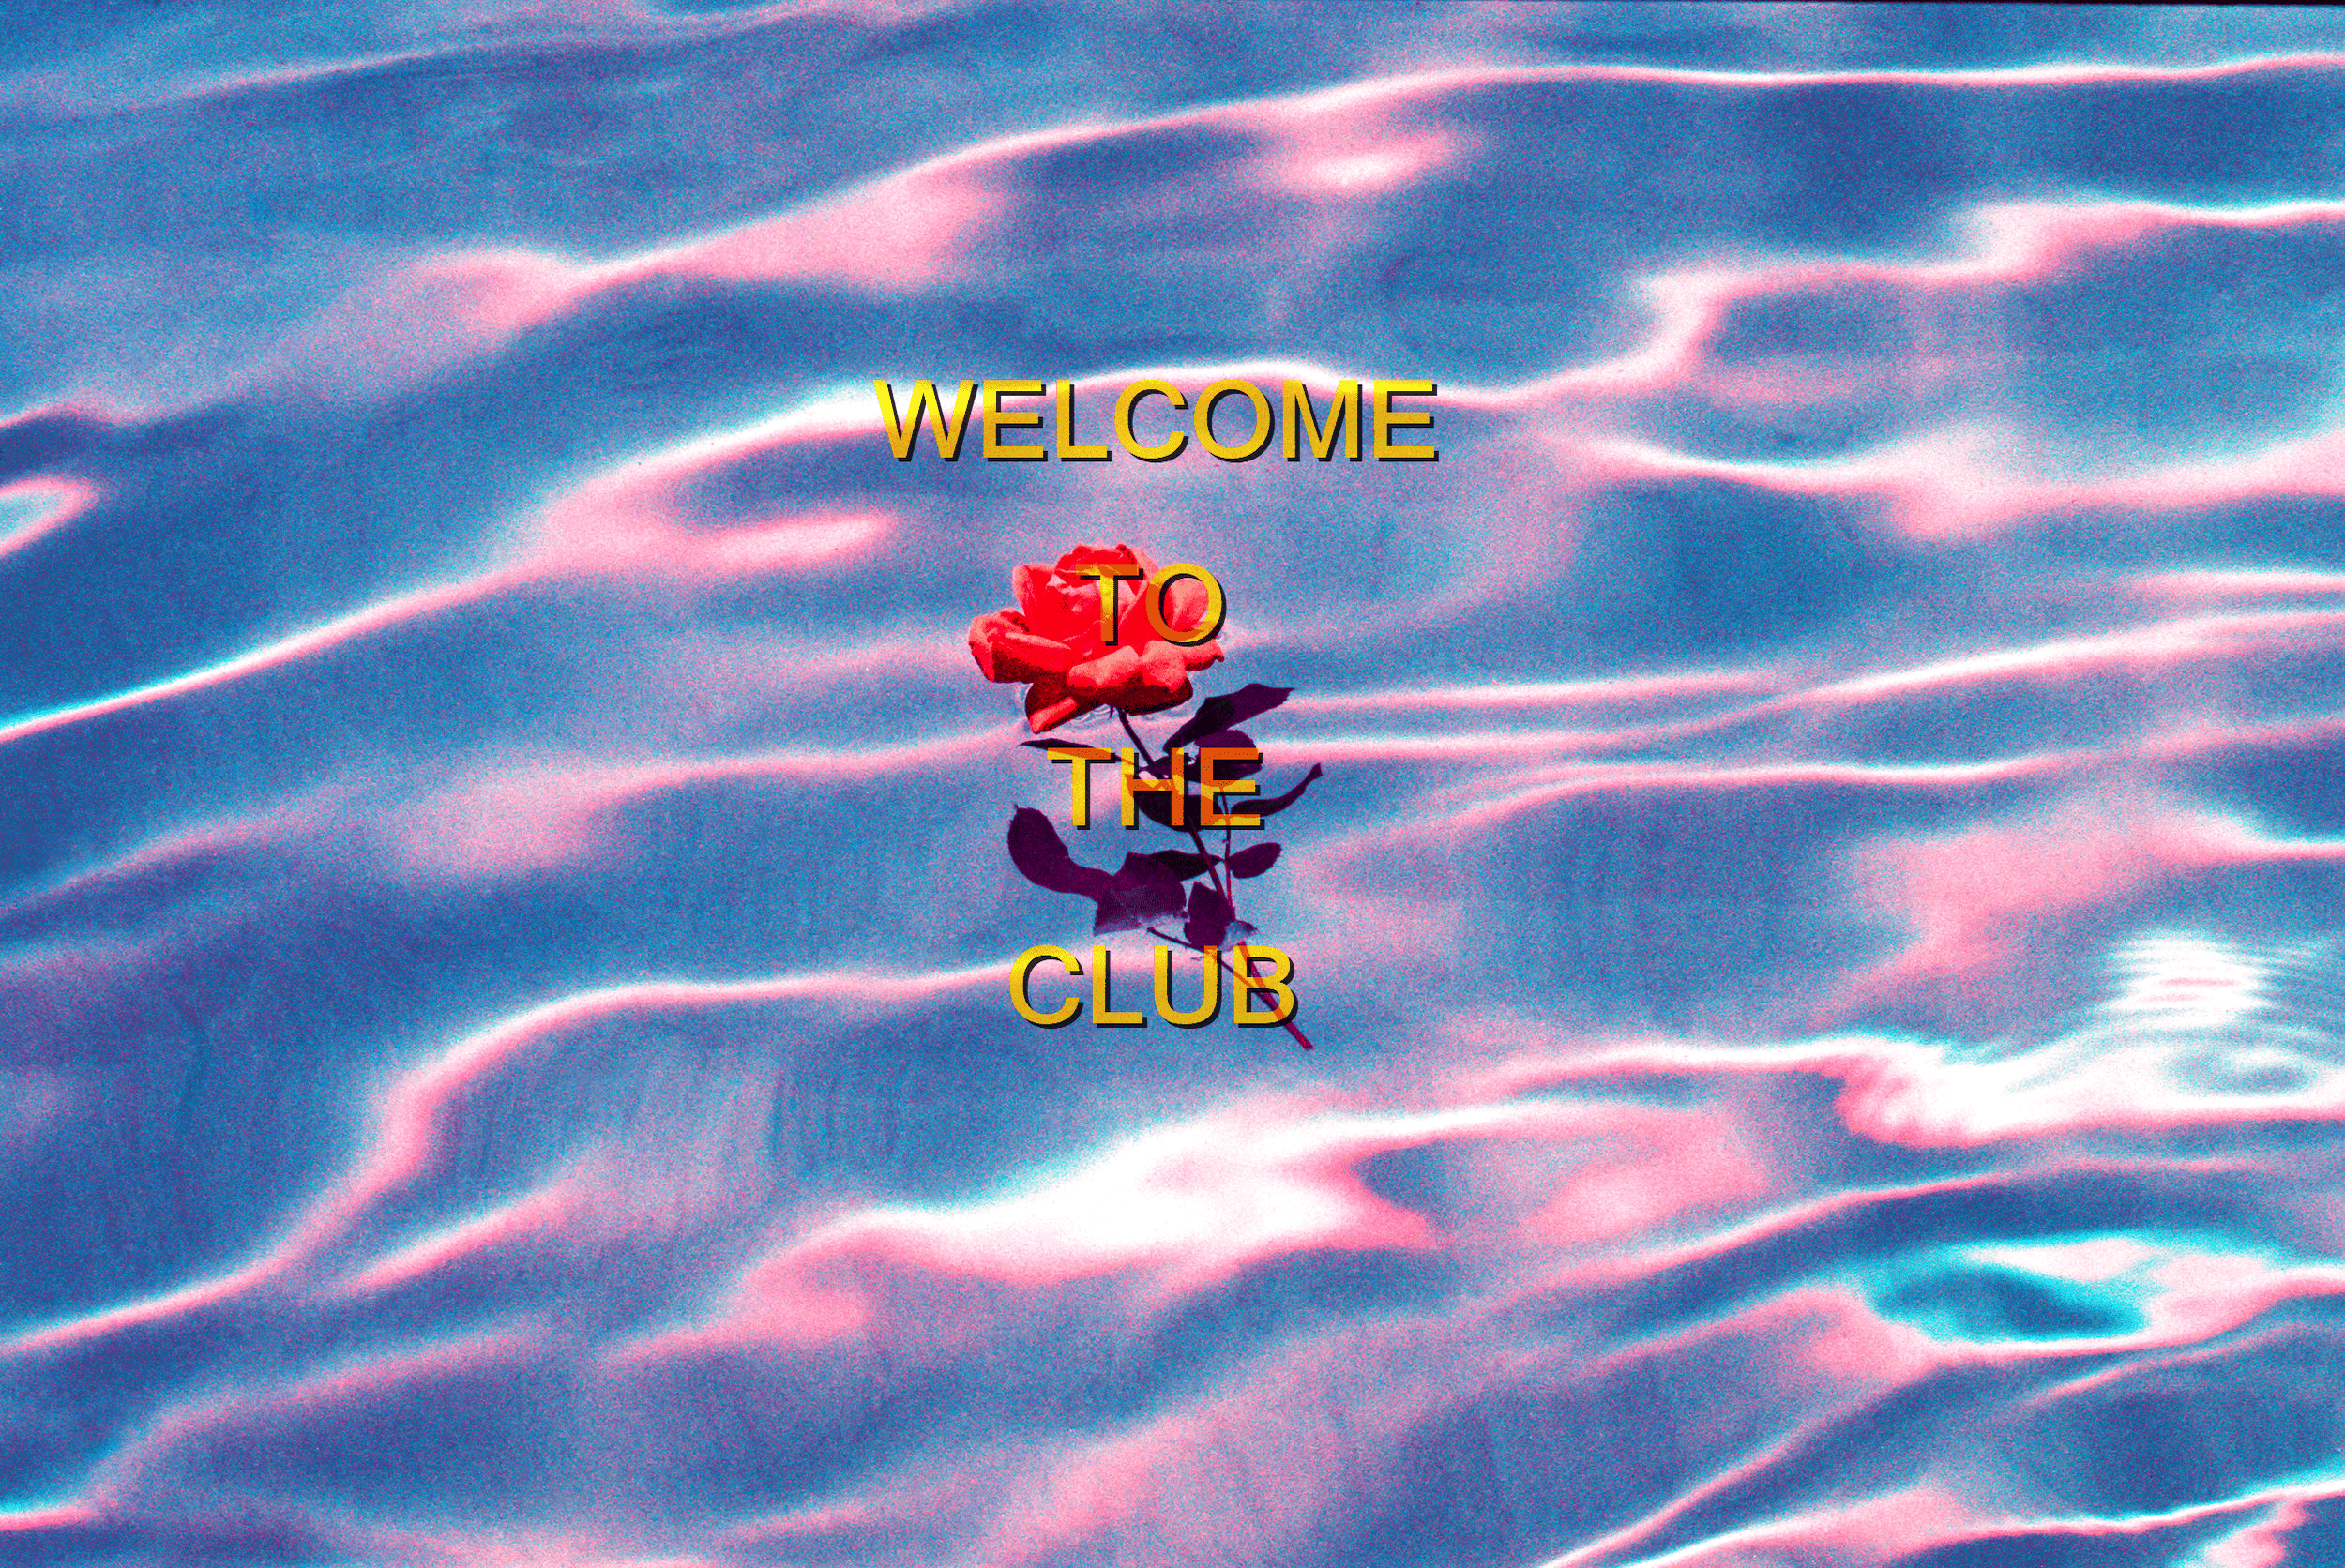 Welcome To The Club Inspired by current shop splashpage design